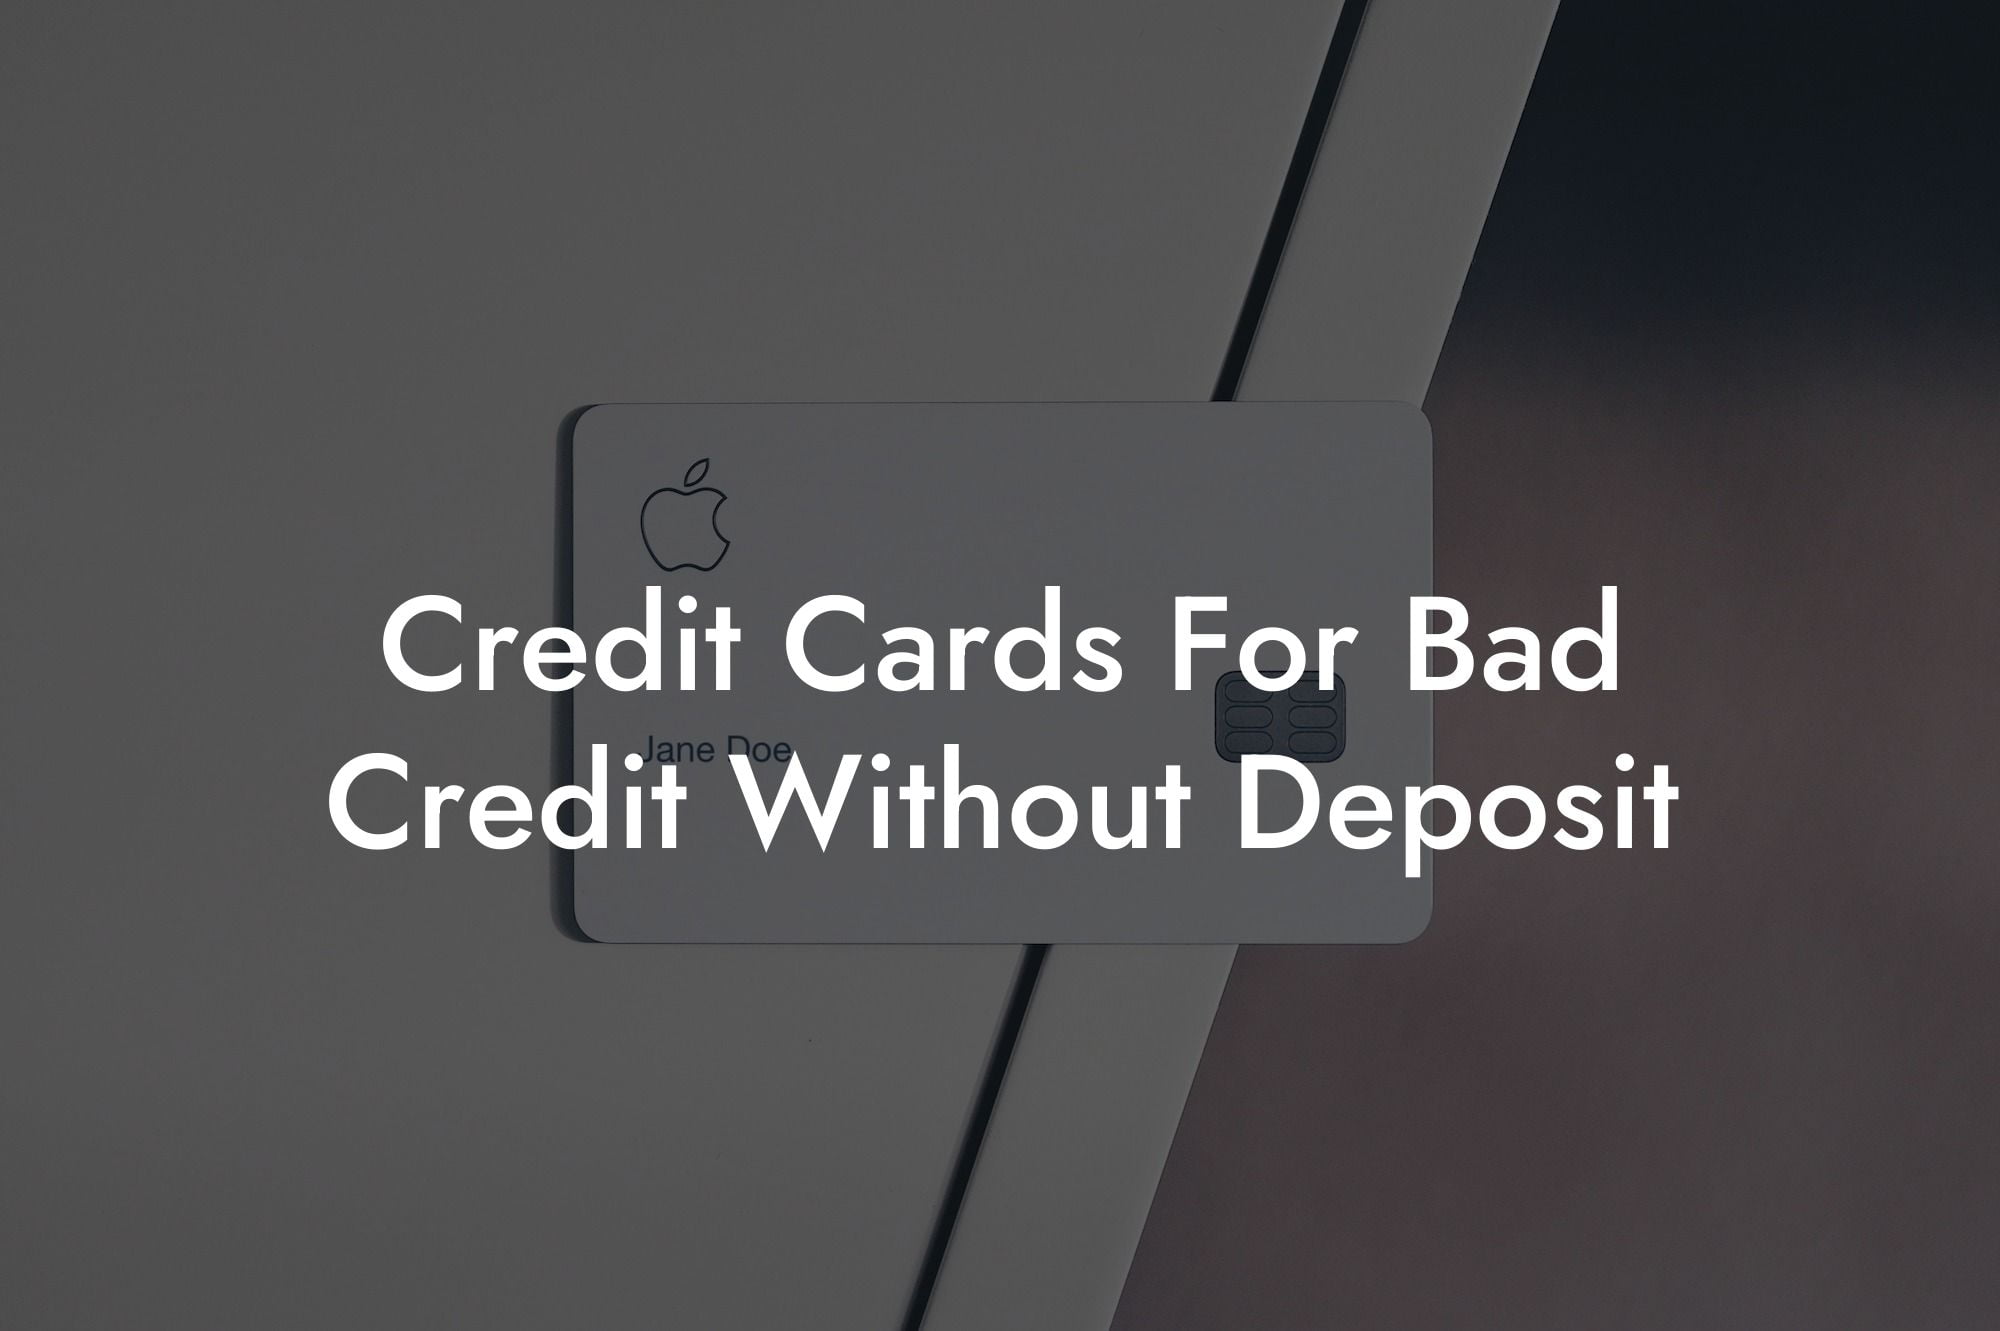 Credit Cards For Bad Credit Without Deposit